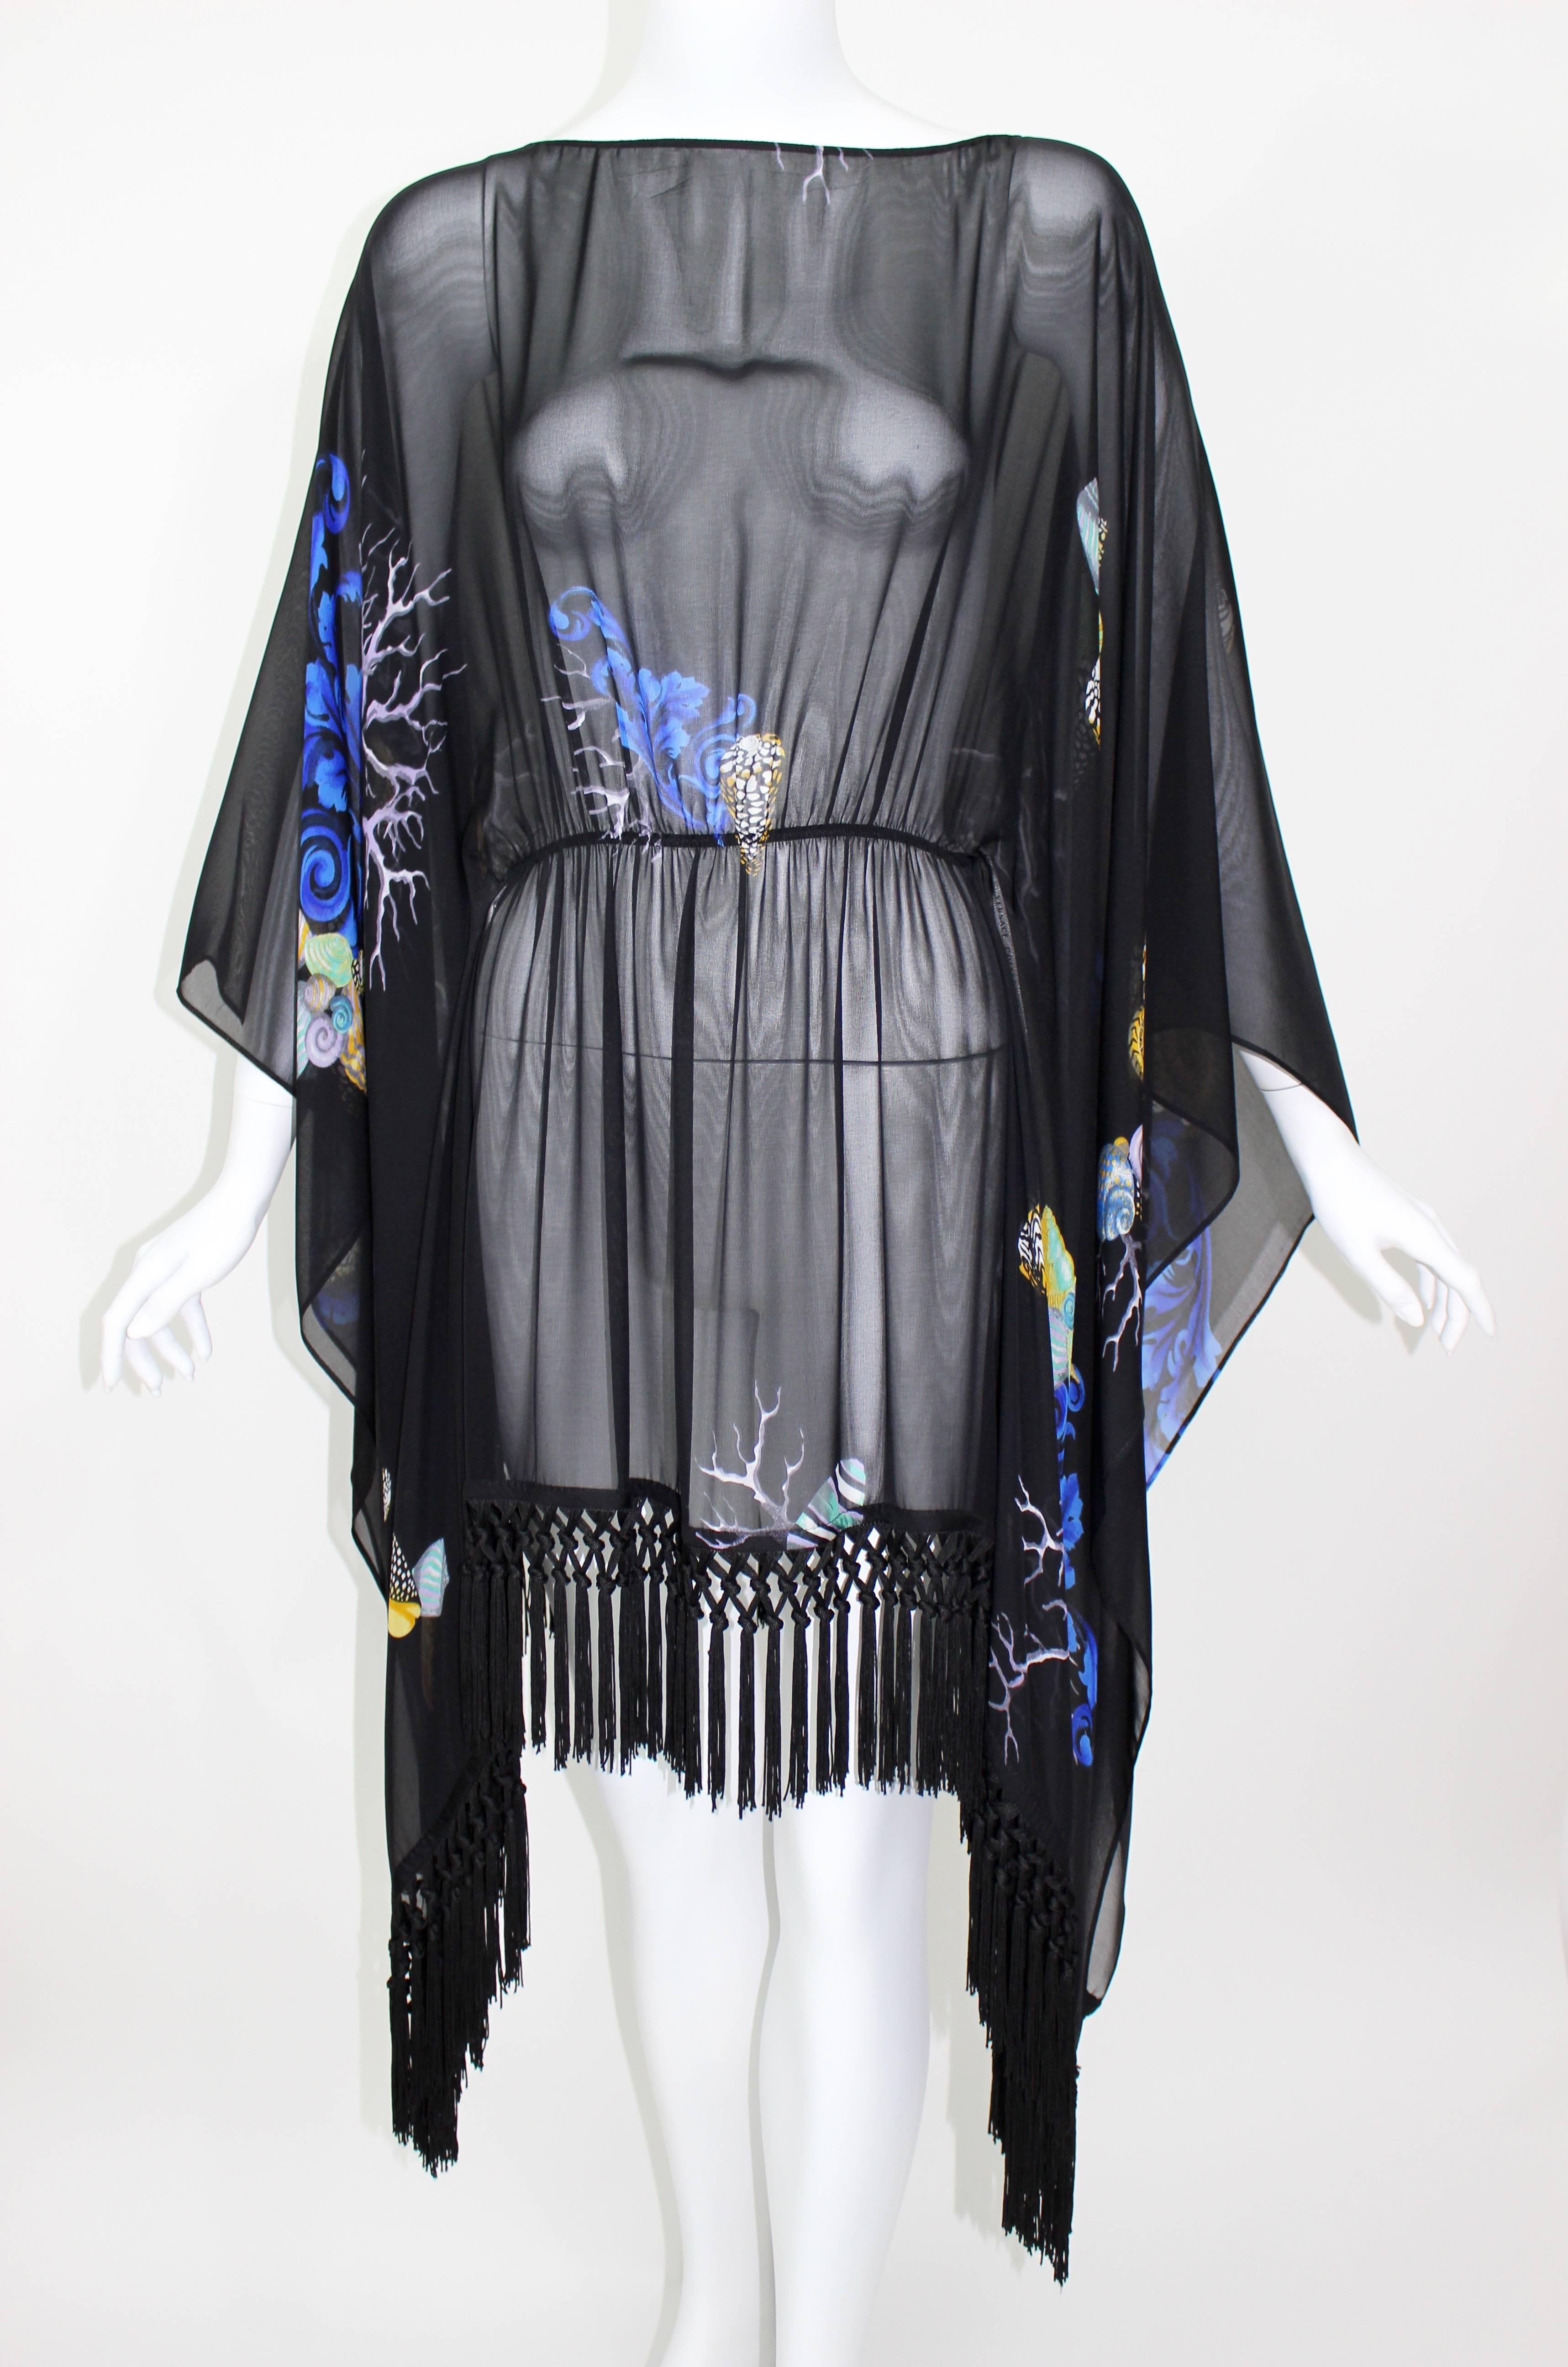 A recent Versace Collection sheer silk top with knotted silk fringe trim.
Kimono style sleeve.
Seashell and Coral Motif Print.
Excellent Condition.

Photographed on a size 4 mannequin

Measurements:
Bust: 34 inches
Waist: 26 inches
Length